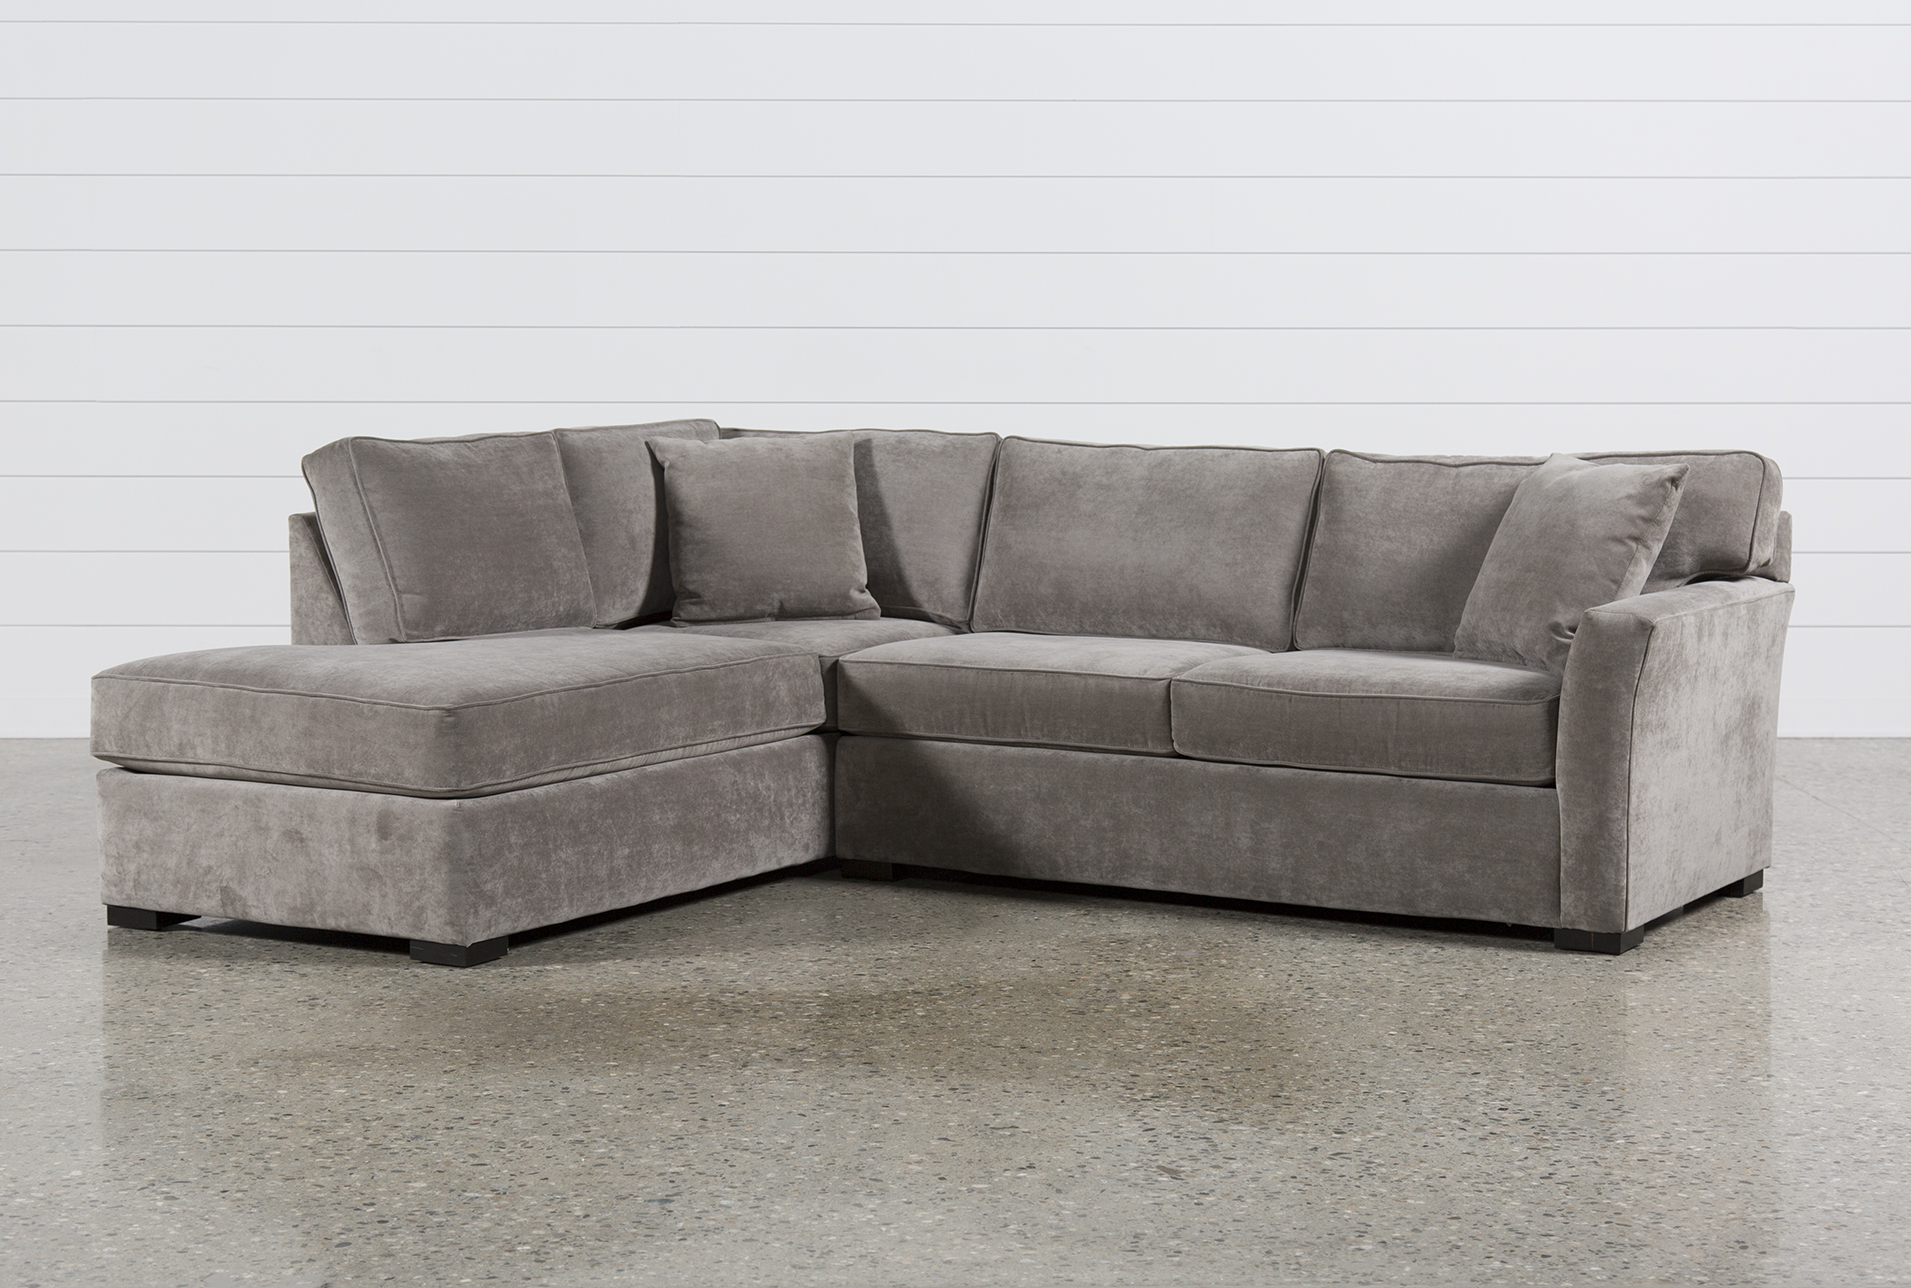 Tips for buying a sectional sleeper couch